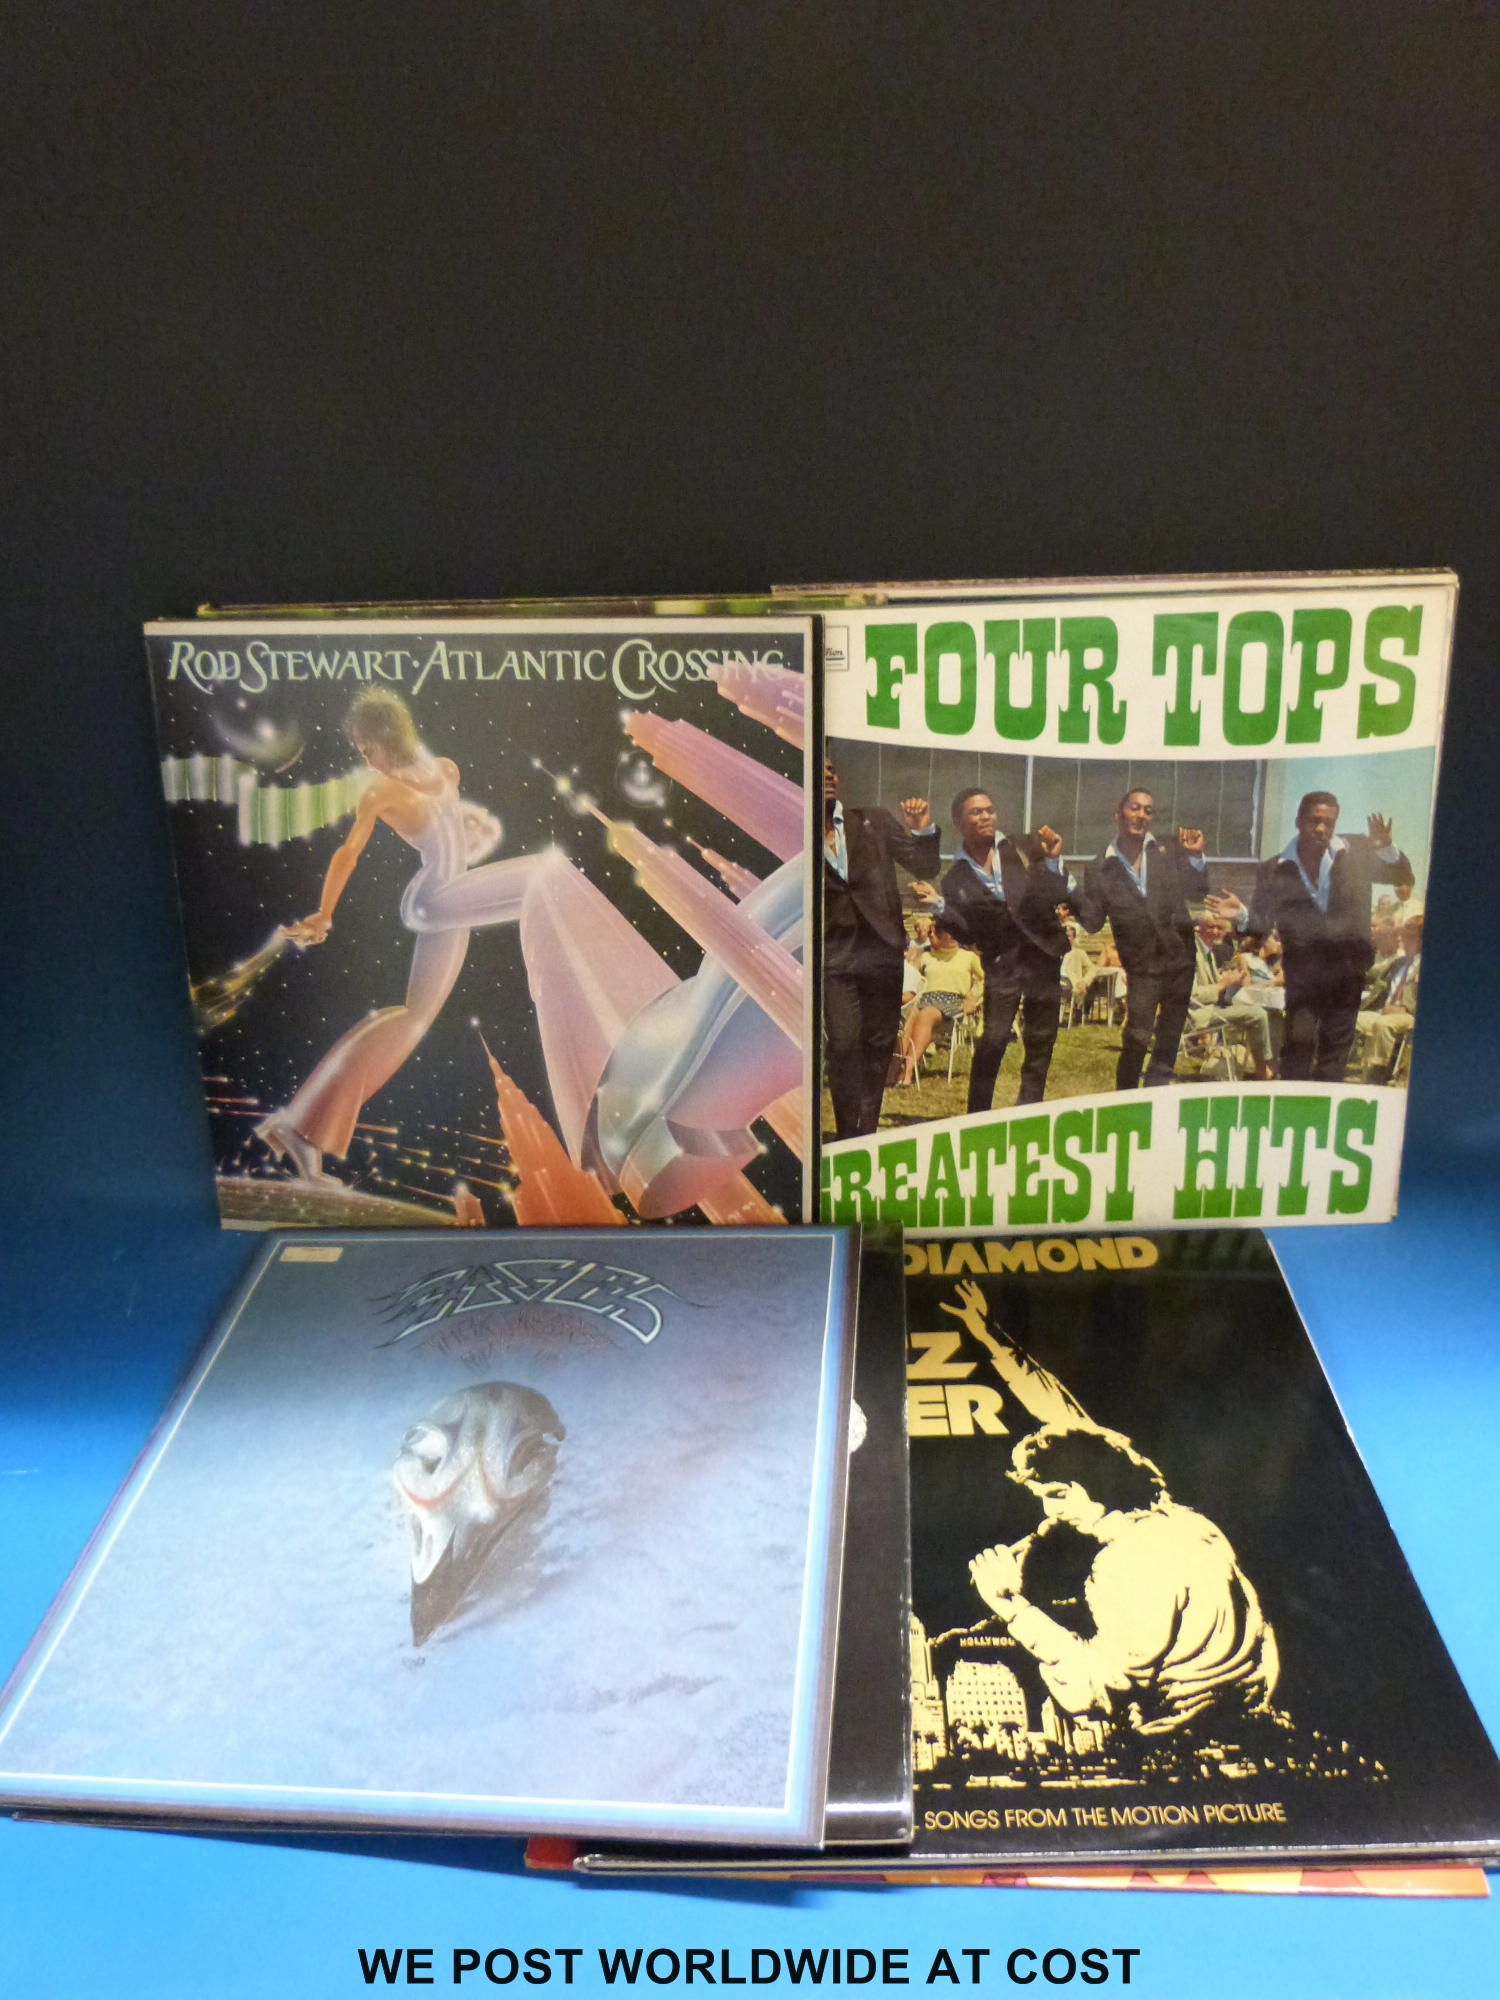 A collection of 26x LPs which includes: Four Tops “Greatest Hits Volume 1” (STML 11061 with